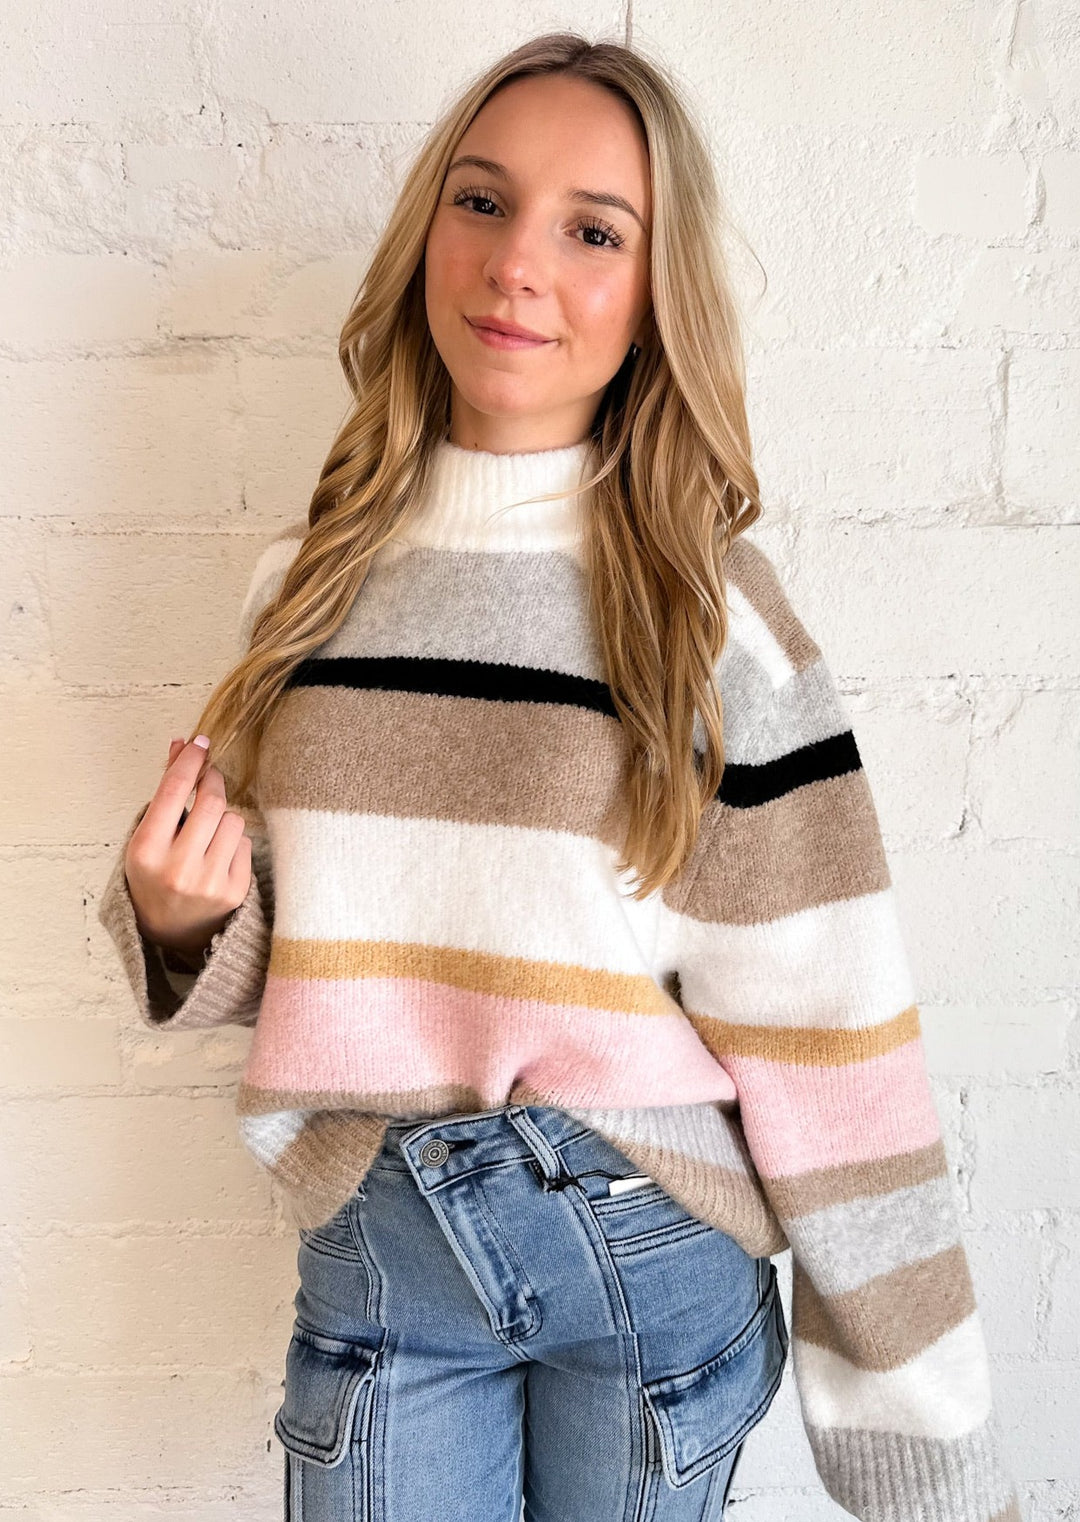 Sugar Mountain Sweater, Tops, Adeline, Adeline, dallas boutique, dallas texas, texas boutique, women's boutique dallas, adeline boutique, dallas boutique, trendy boutique, affordable boutique